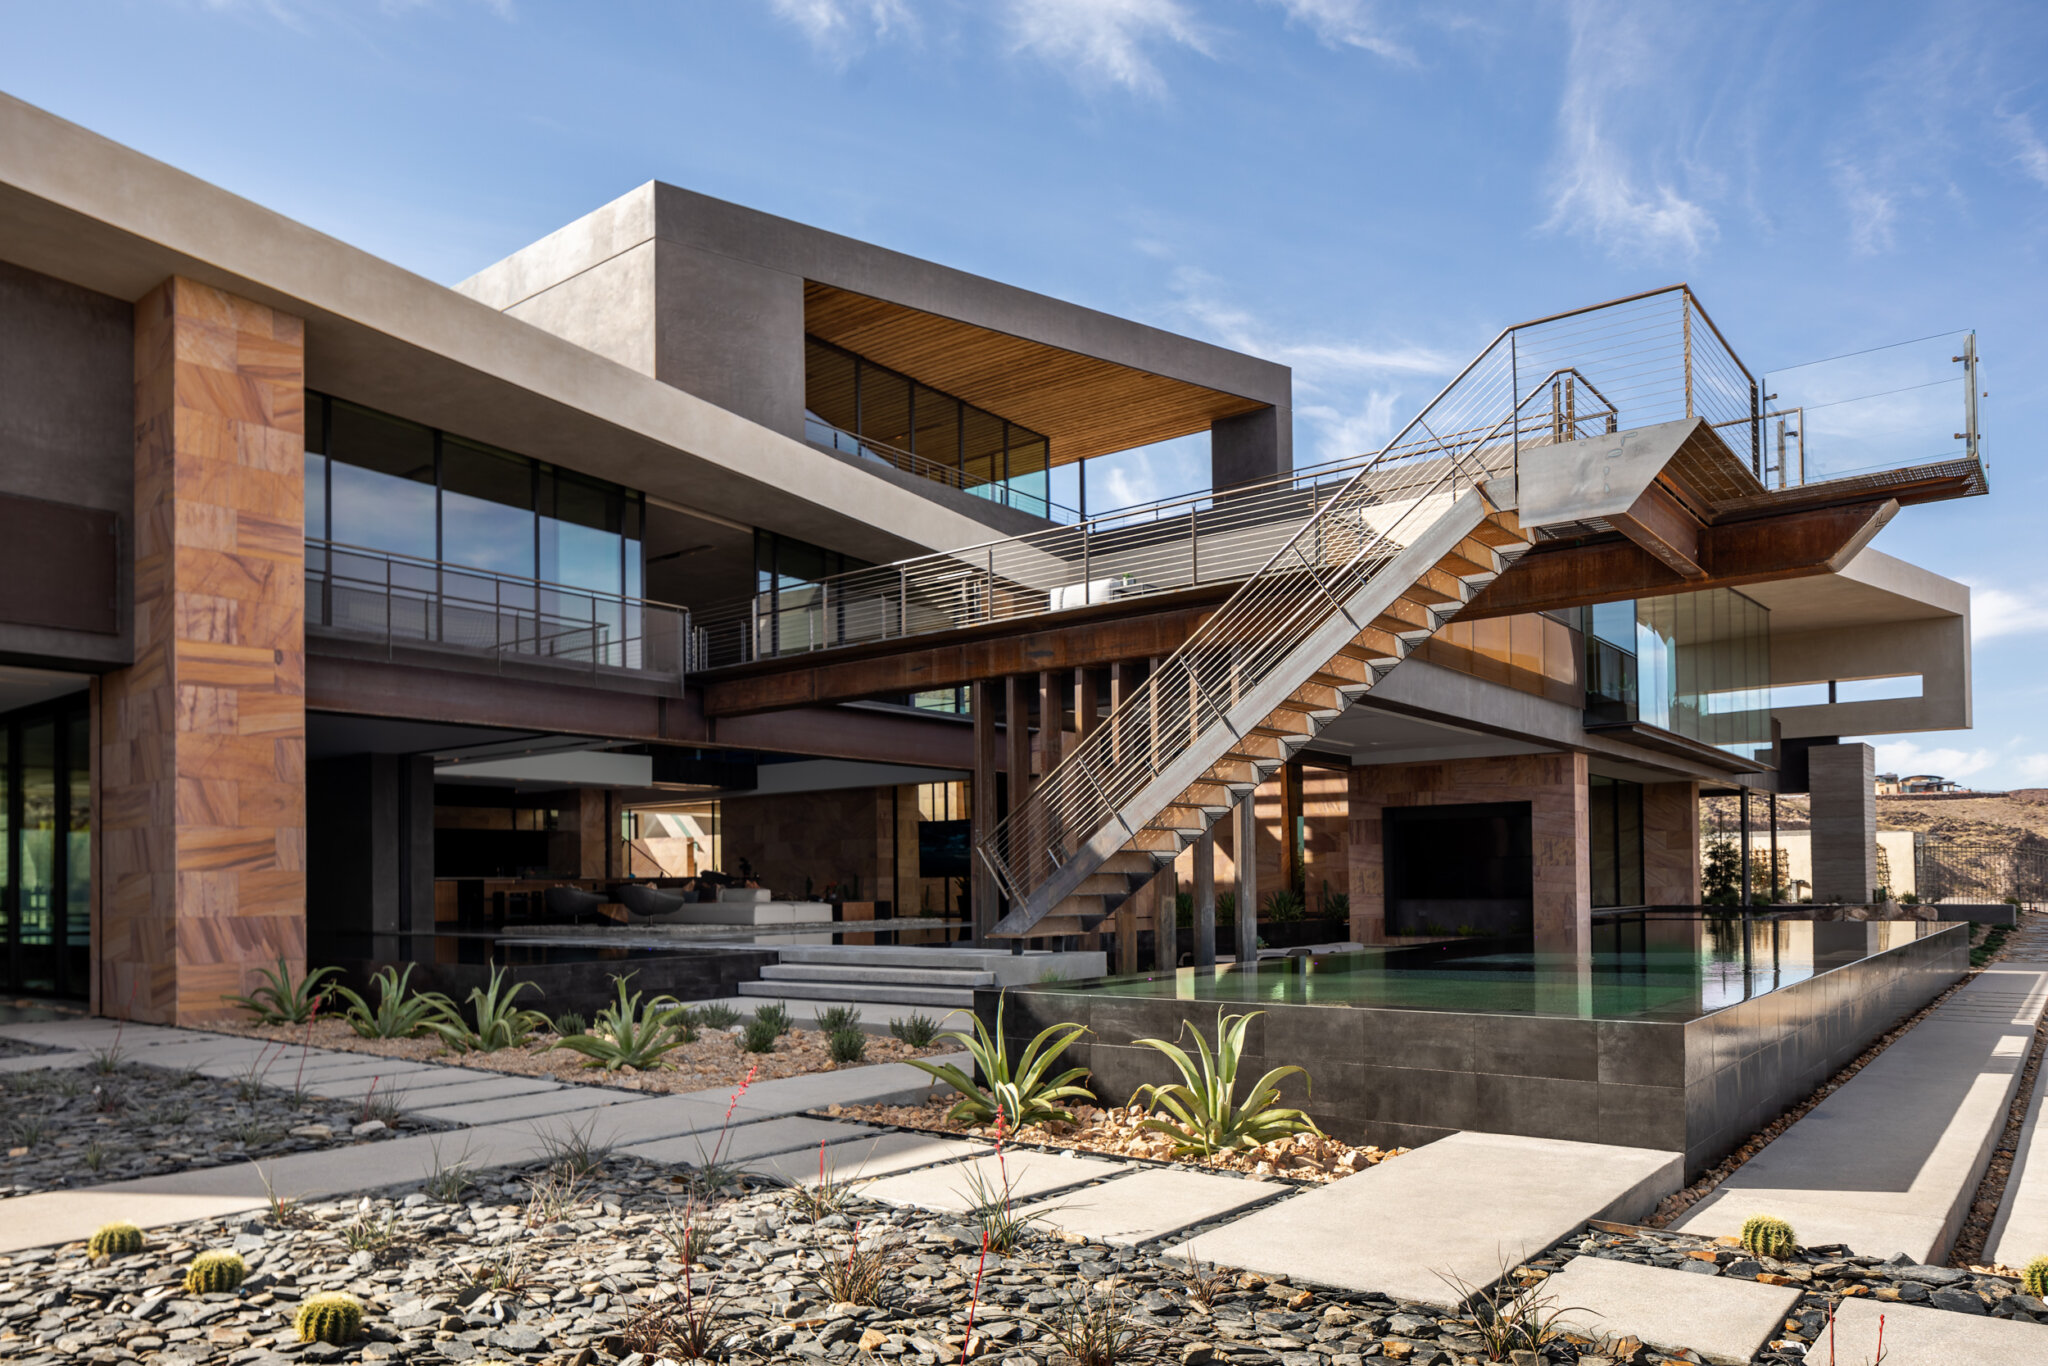 A custom home featuring an exterior steel stair created by stairs contractors, JD Stairs